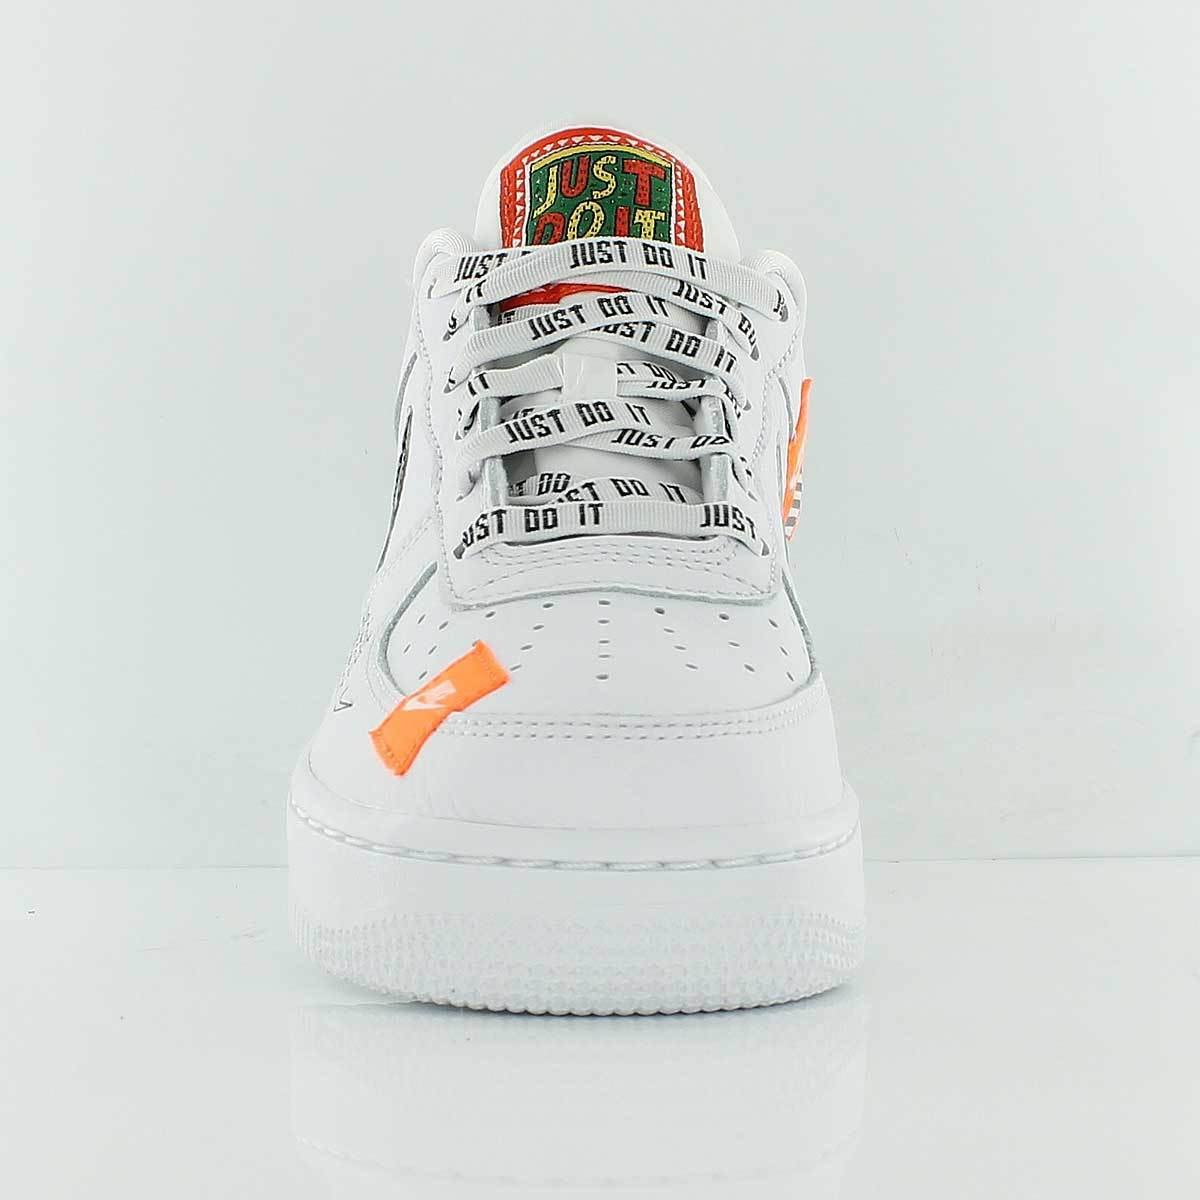 air force nike white skroutz, Off 67%